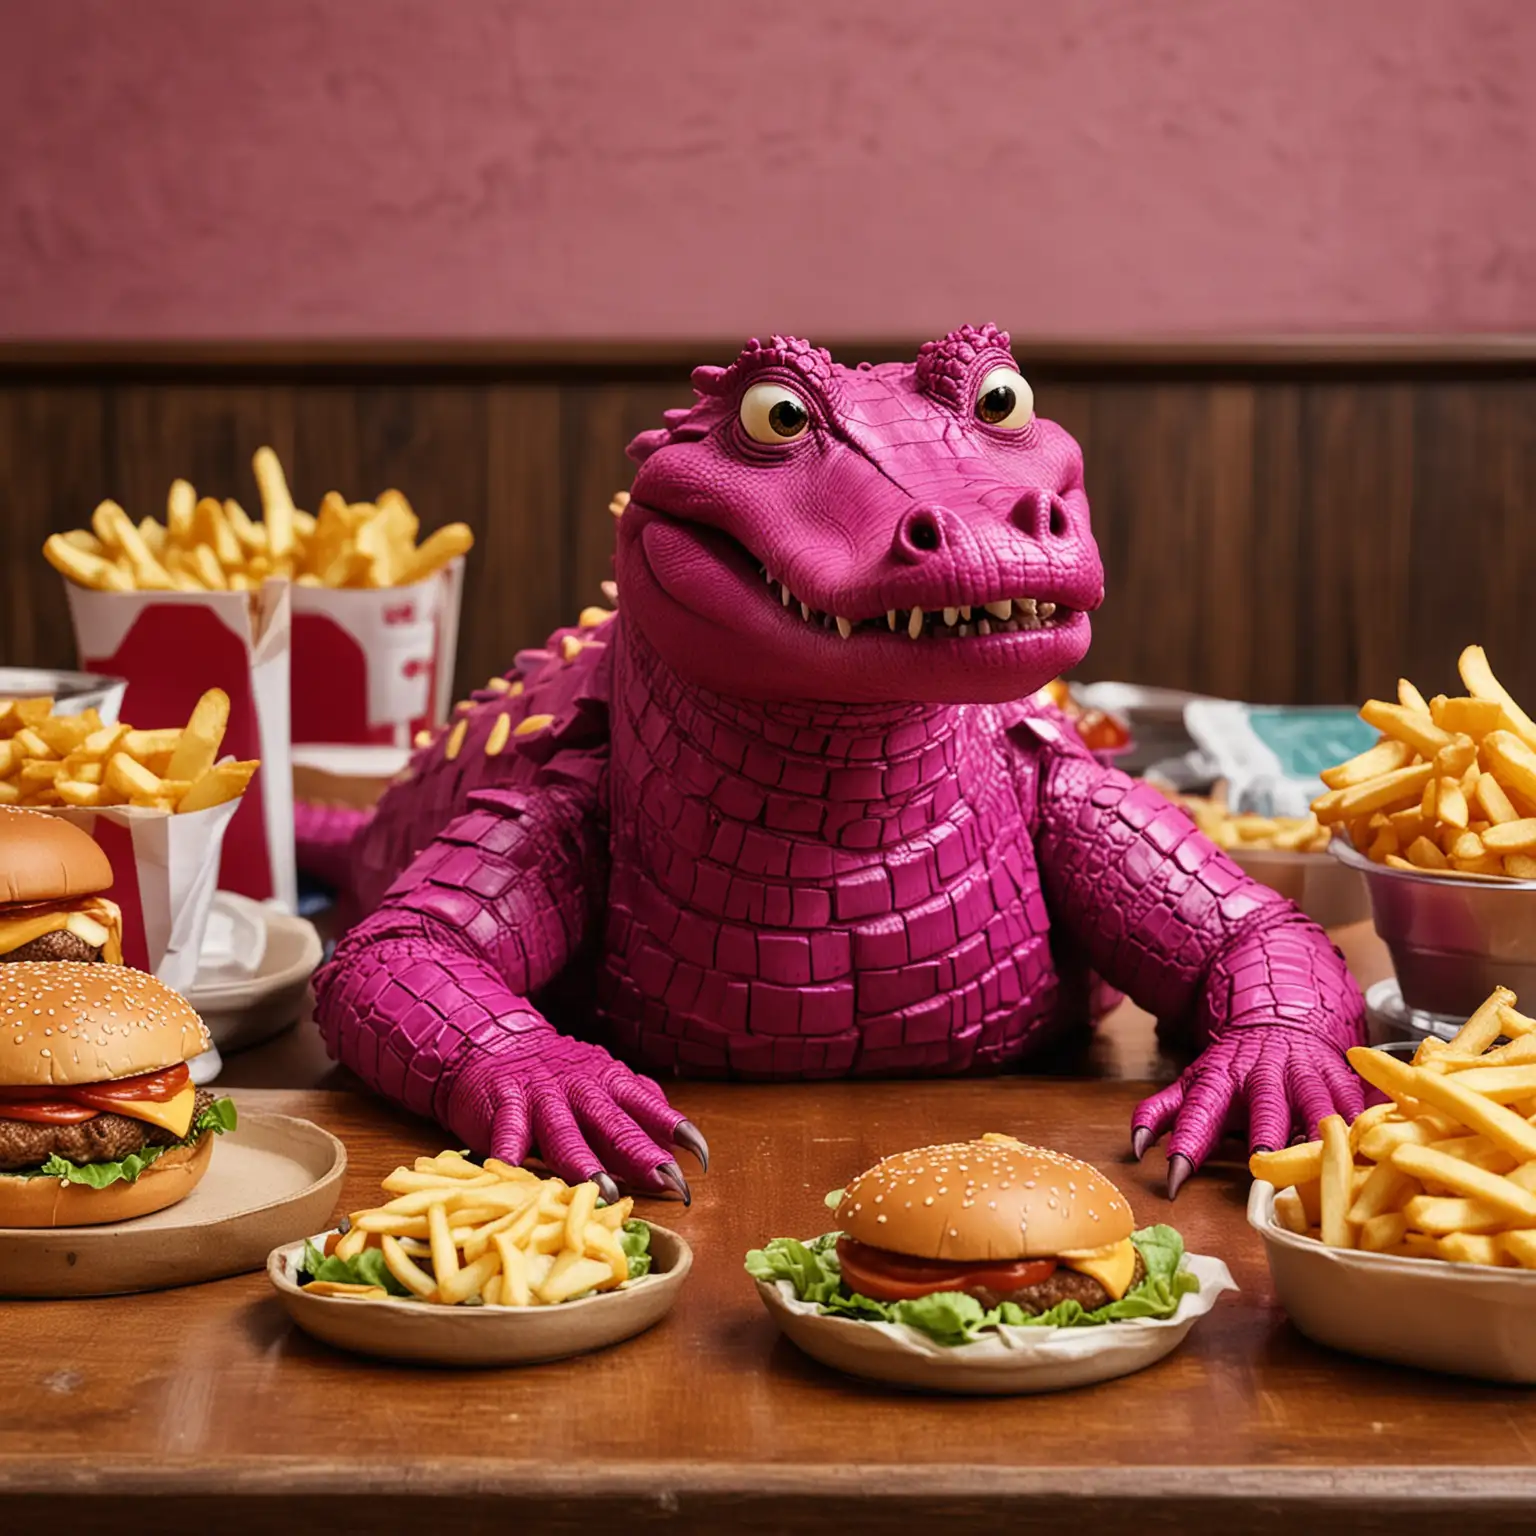 A magenta crocodile sitting at a table. The table is full of hamburgers and fries